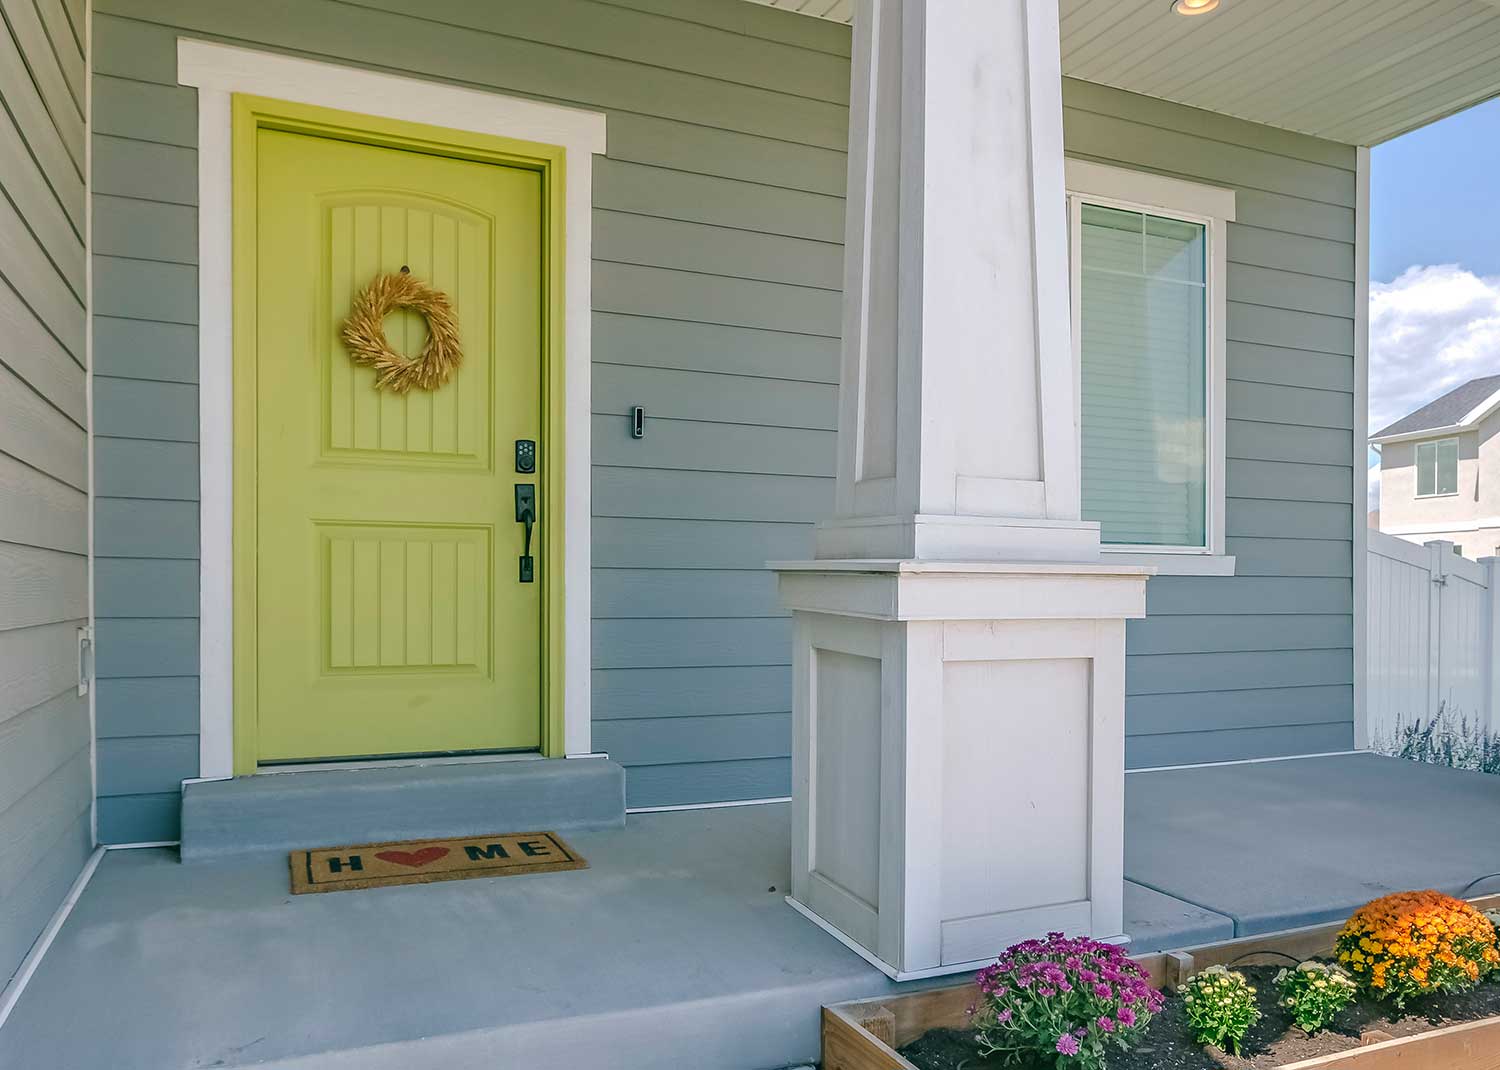 Home with green door, porch and flowers